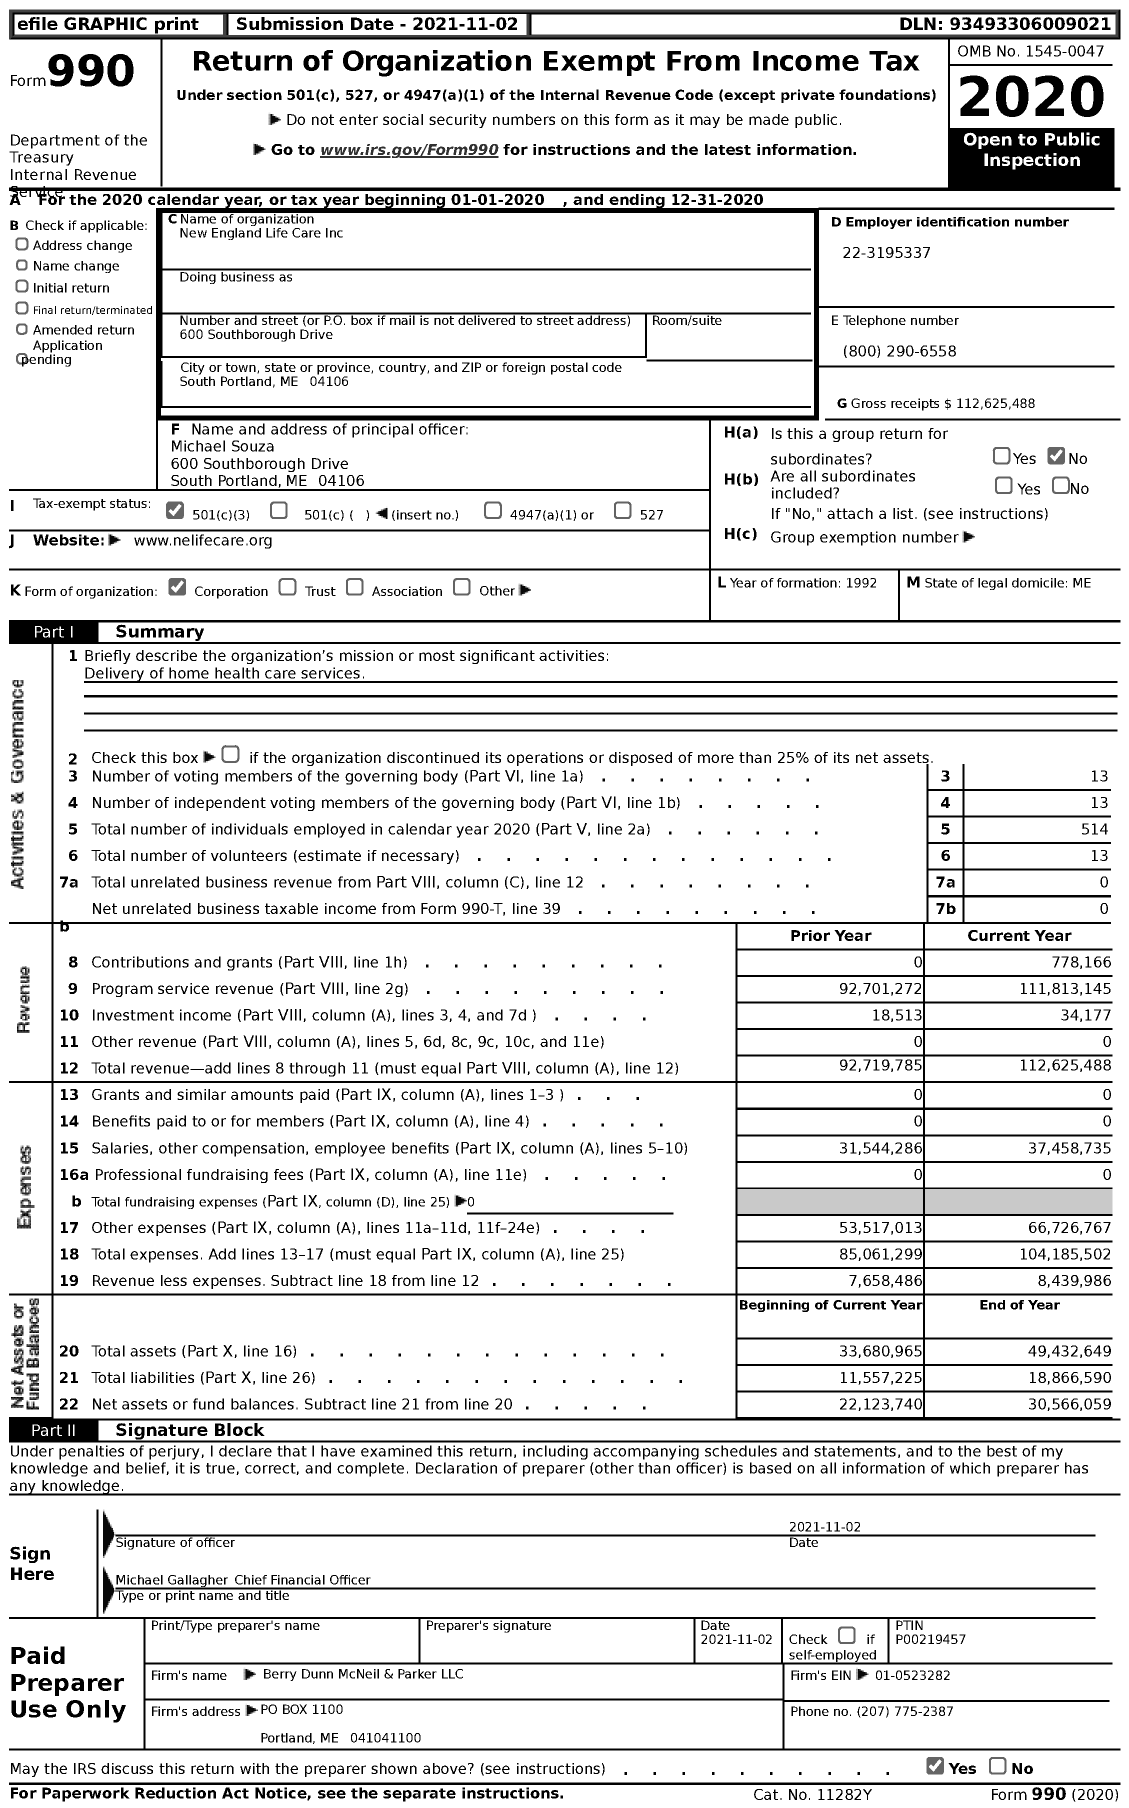 Image of first page of 2020 Form 990 for New England Life Care (NELC)